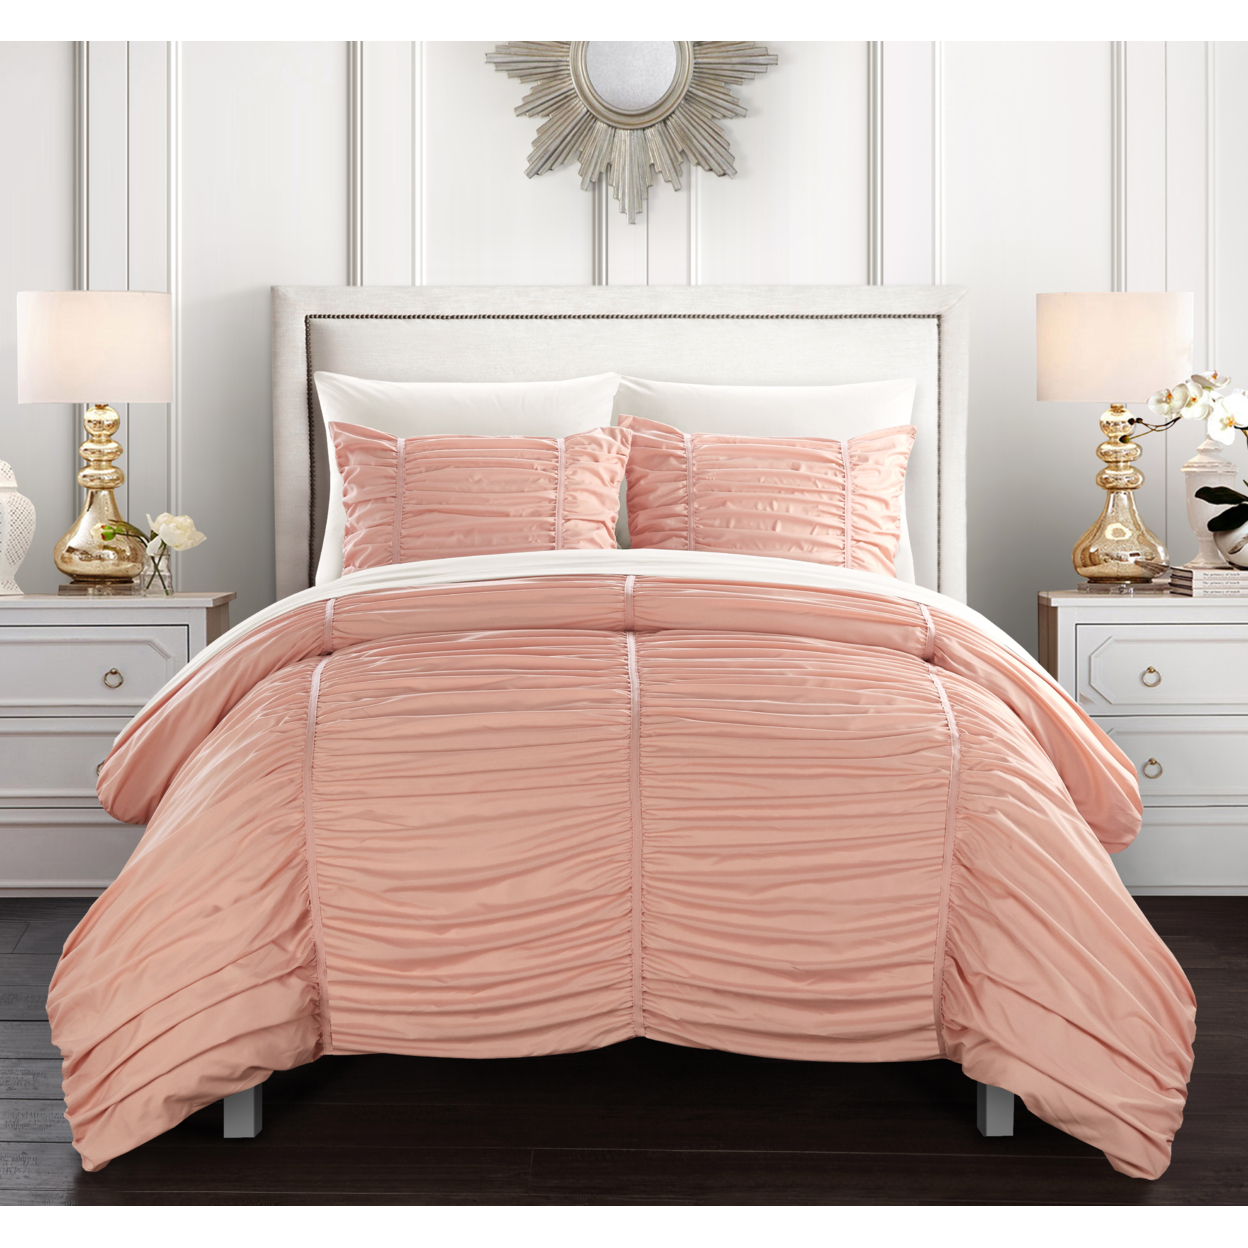 Kiela 2 Pc Or 3 Pc Ruched Comforter Set - Coral, Twin